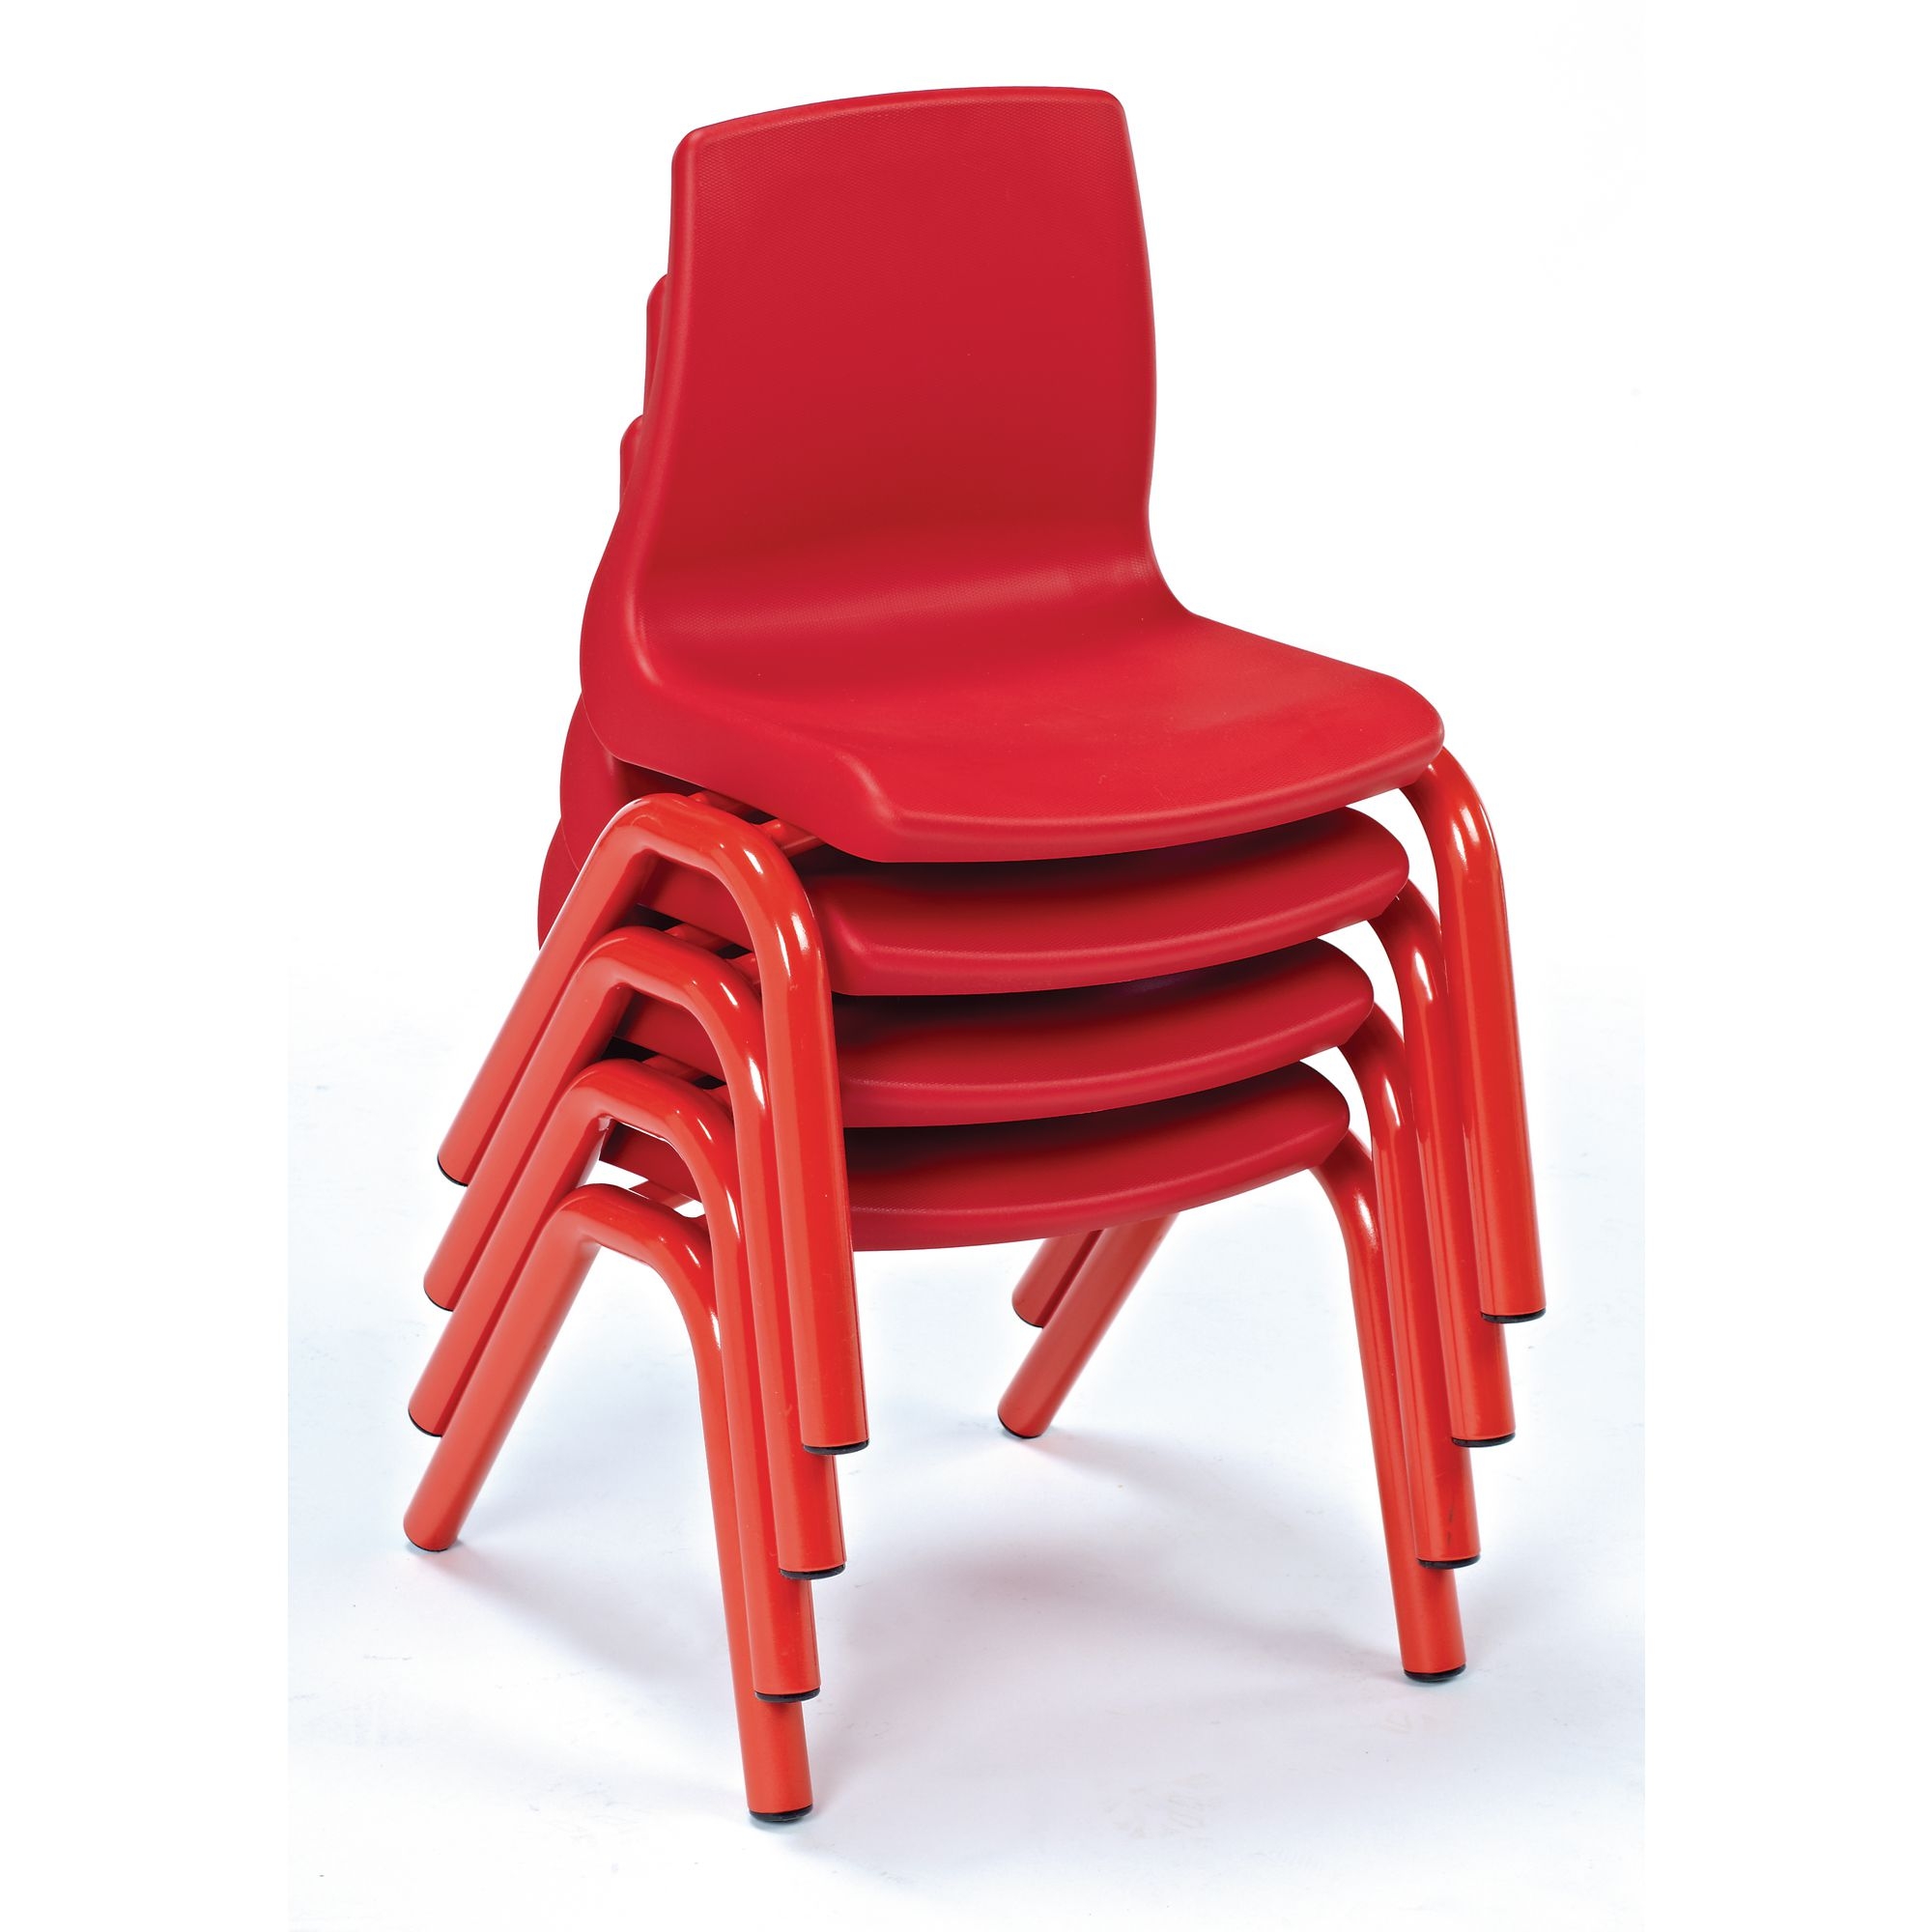 Harlequin Chairs - Size D - Seat height: 380mm - Red